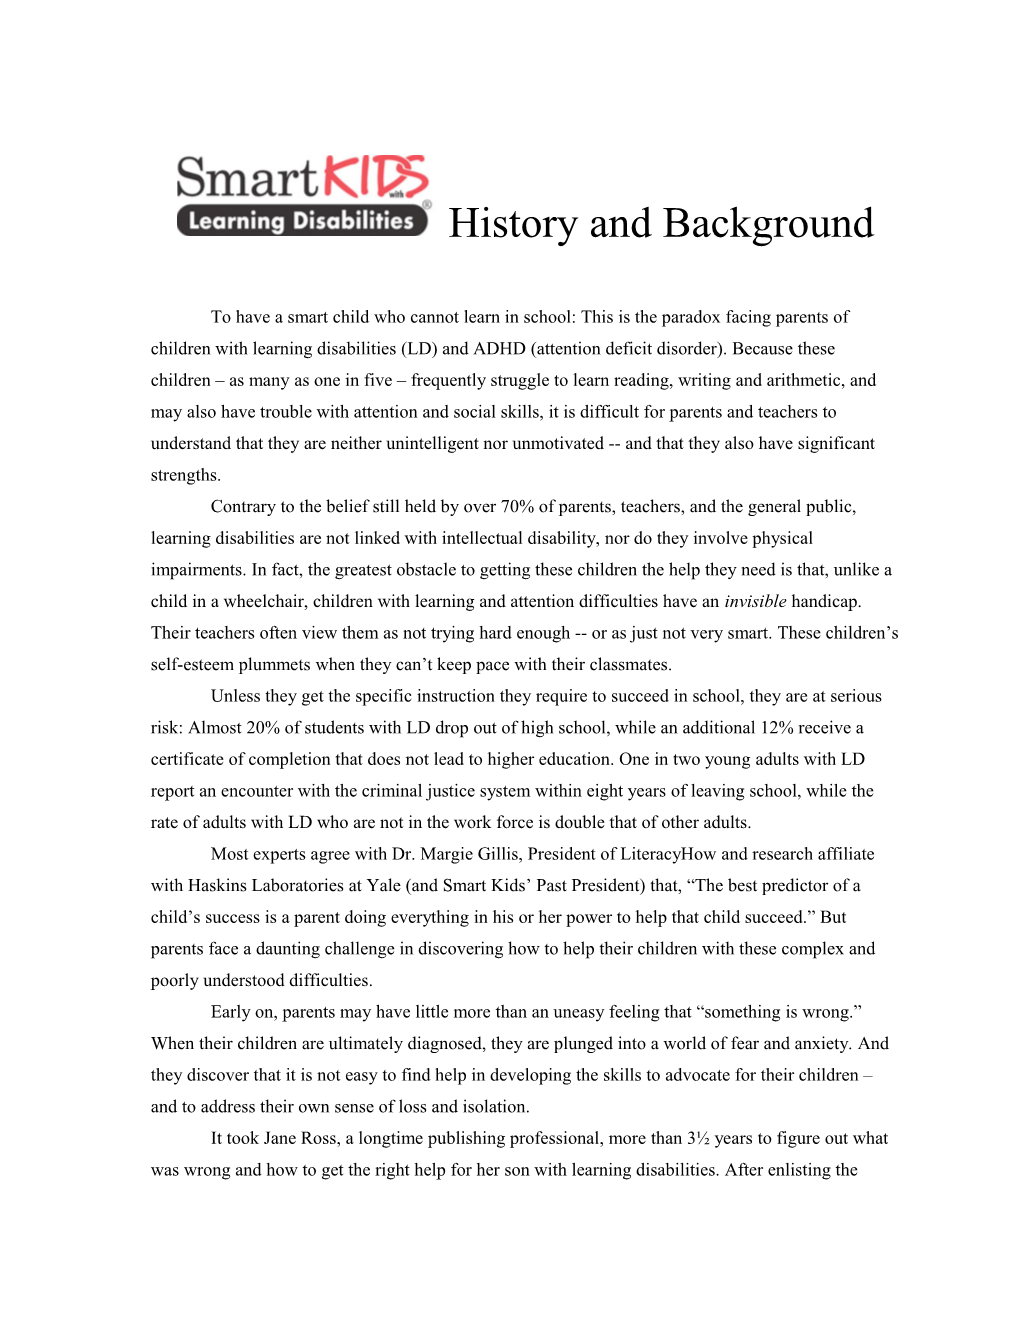 Smart Kids with Learning Disabilities, Inc